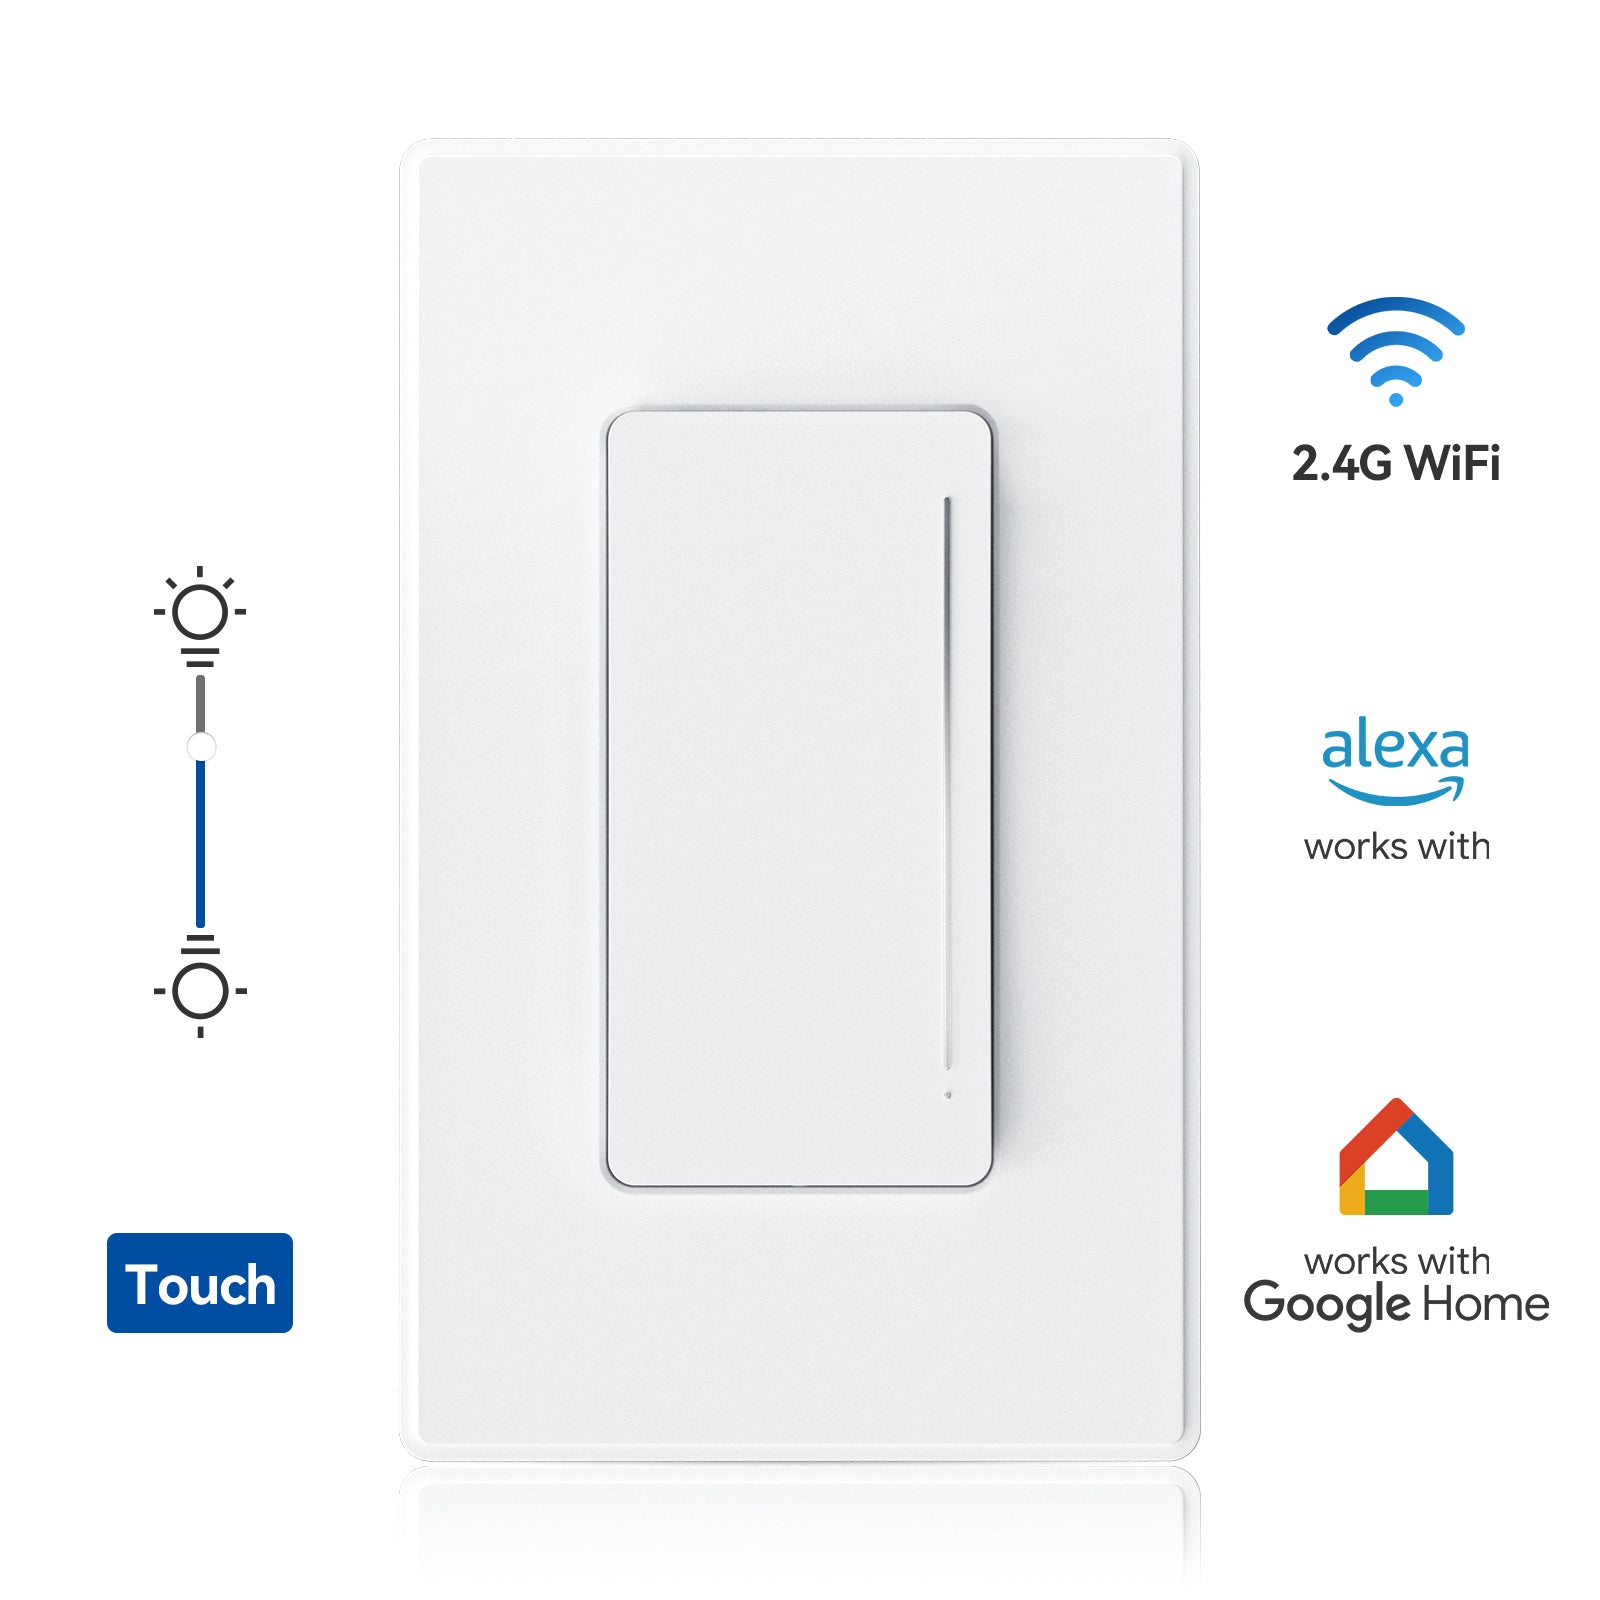 ELEGRP Smart Dimmer Light Switch DTR30, Single Pole or 3 Way, 2.4GHz Wi-Fi  Touch Dimmer Works with Alexa and Google Assistant, Needs Neutral Wire, No  Hub Required, UL and FCC Listed, Black